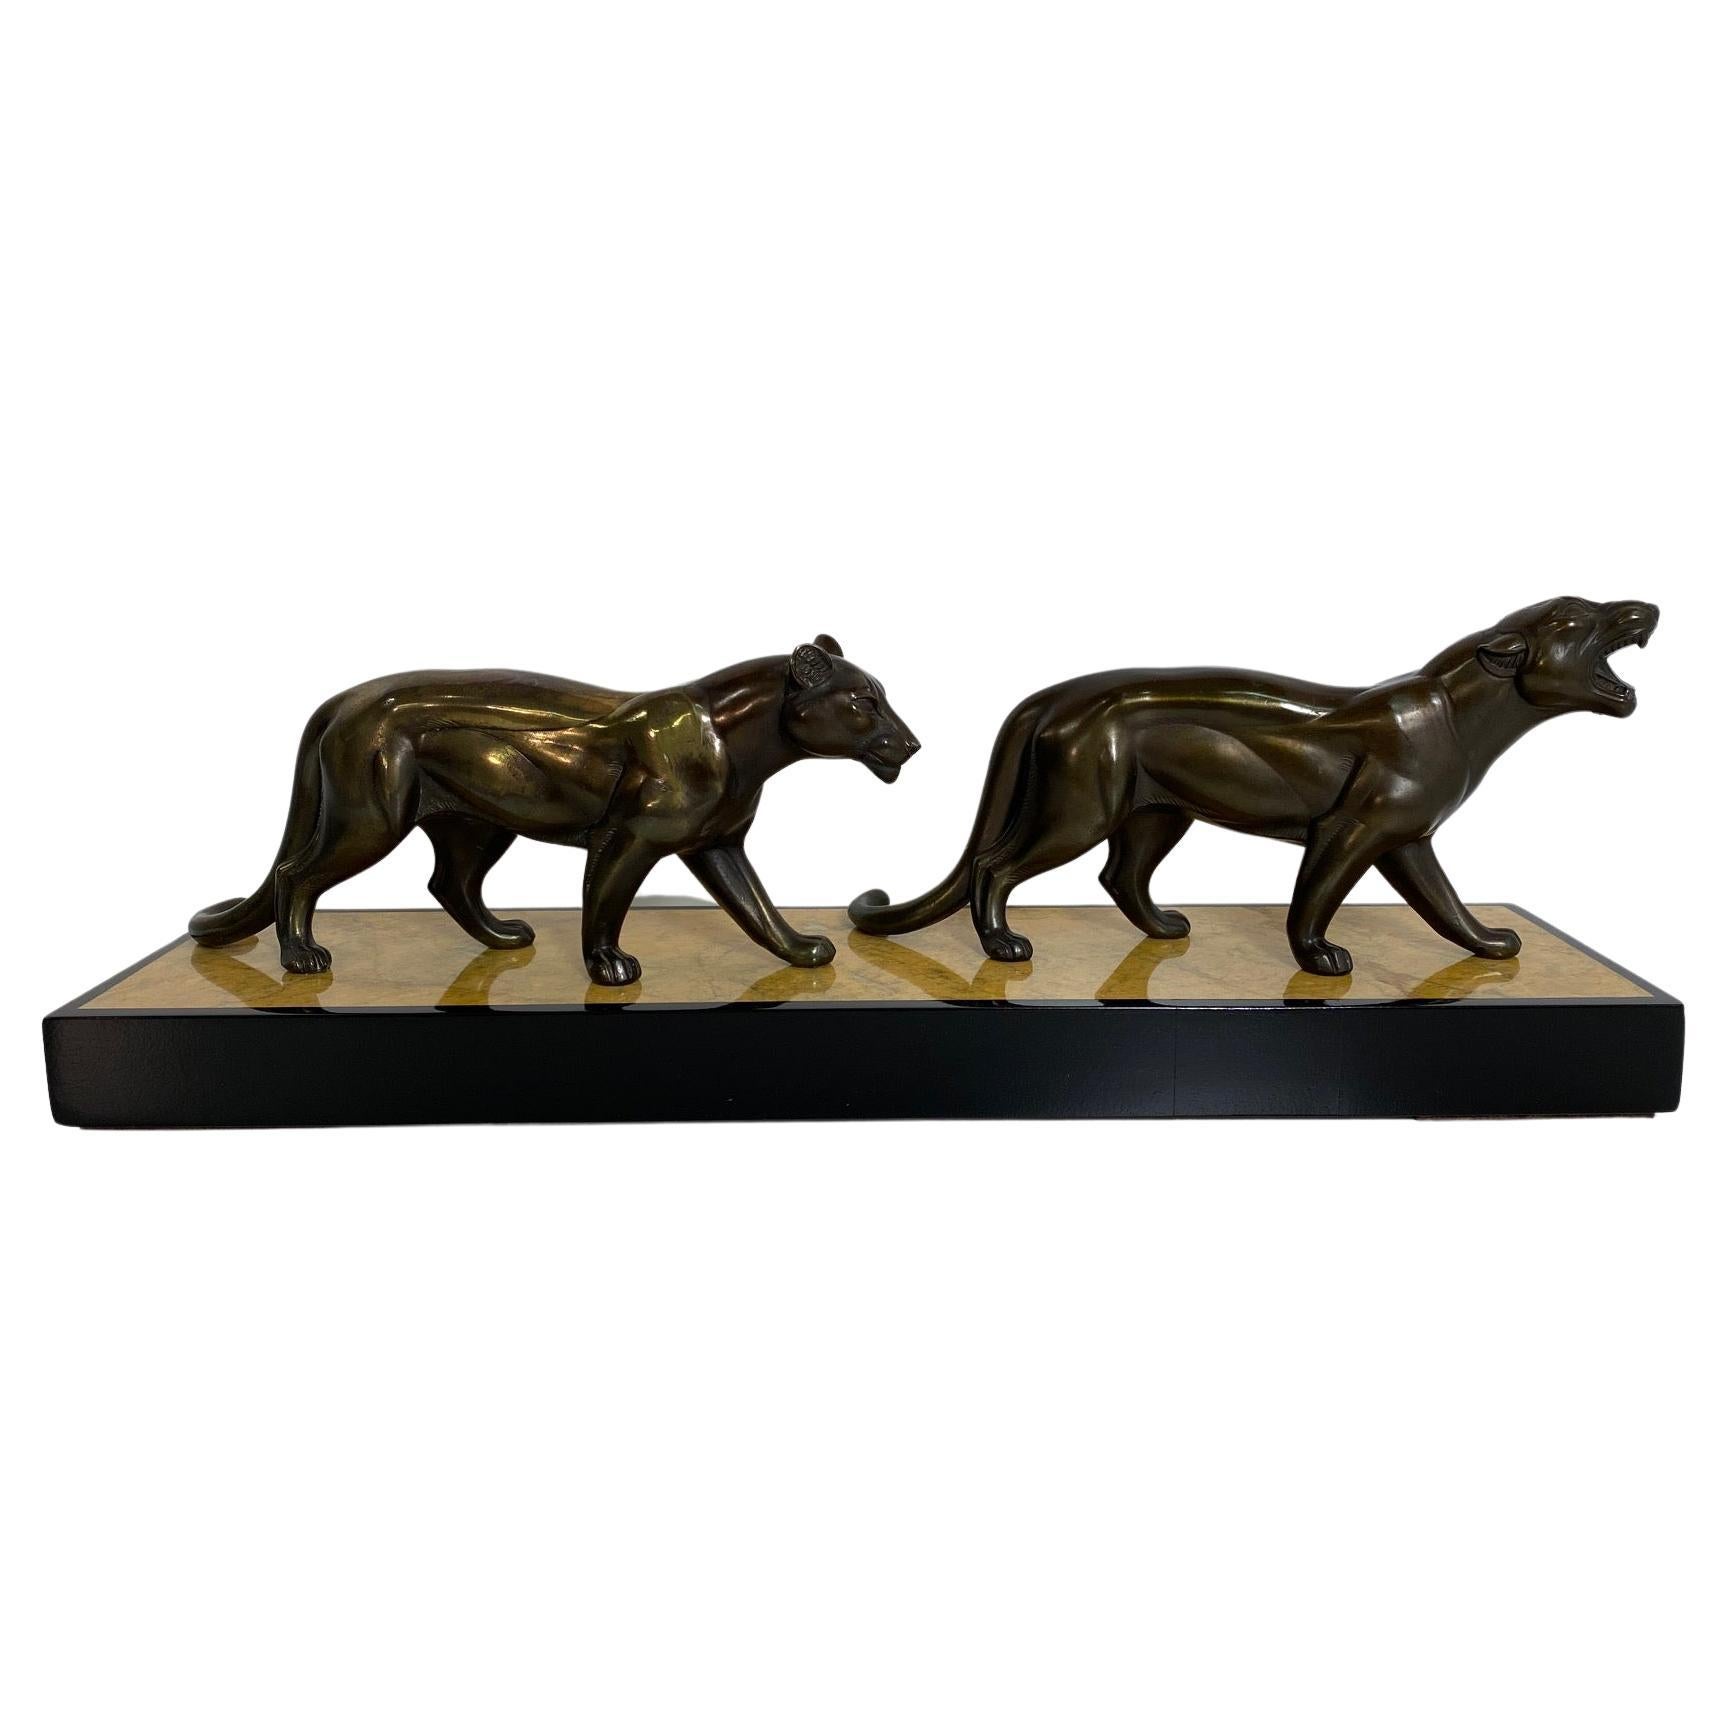 French Art Deco Group of Panthers Sculpture, 1930s